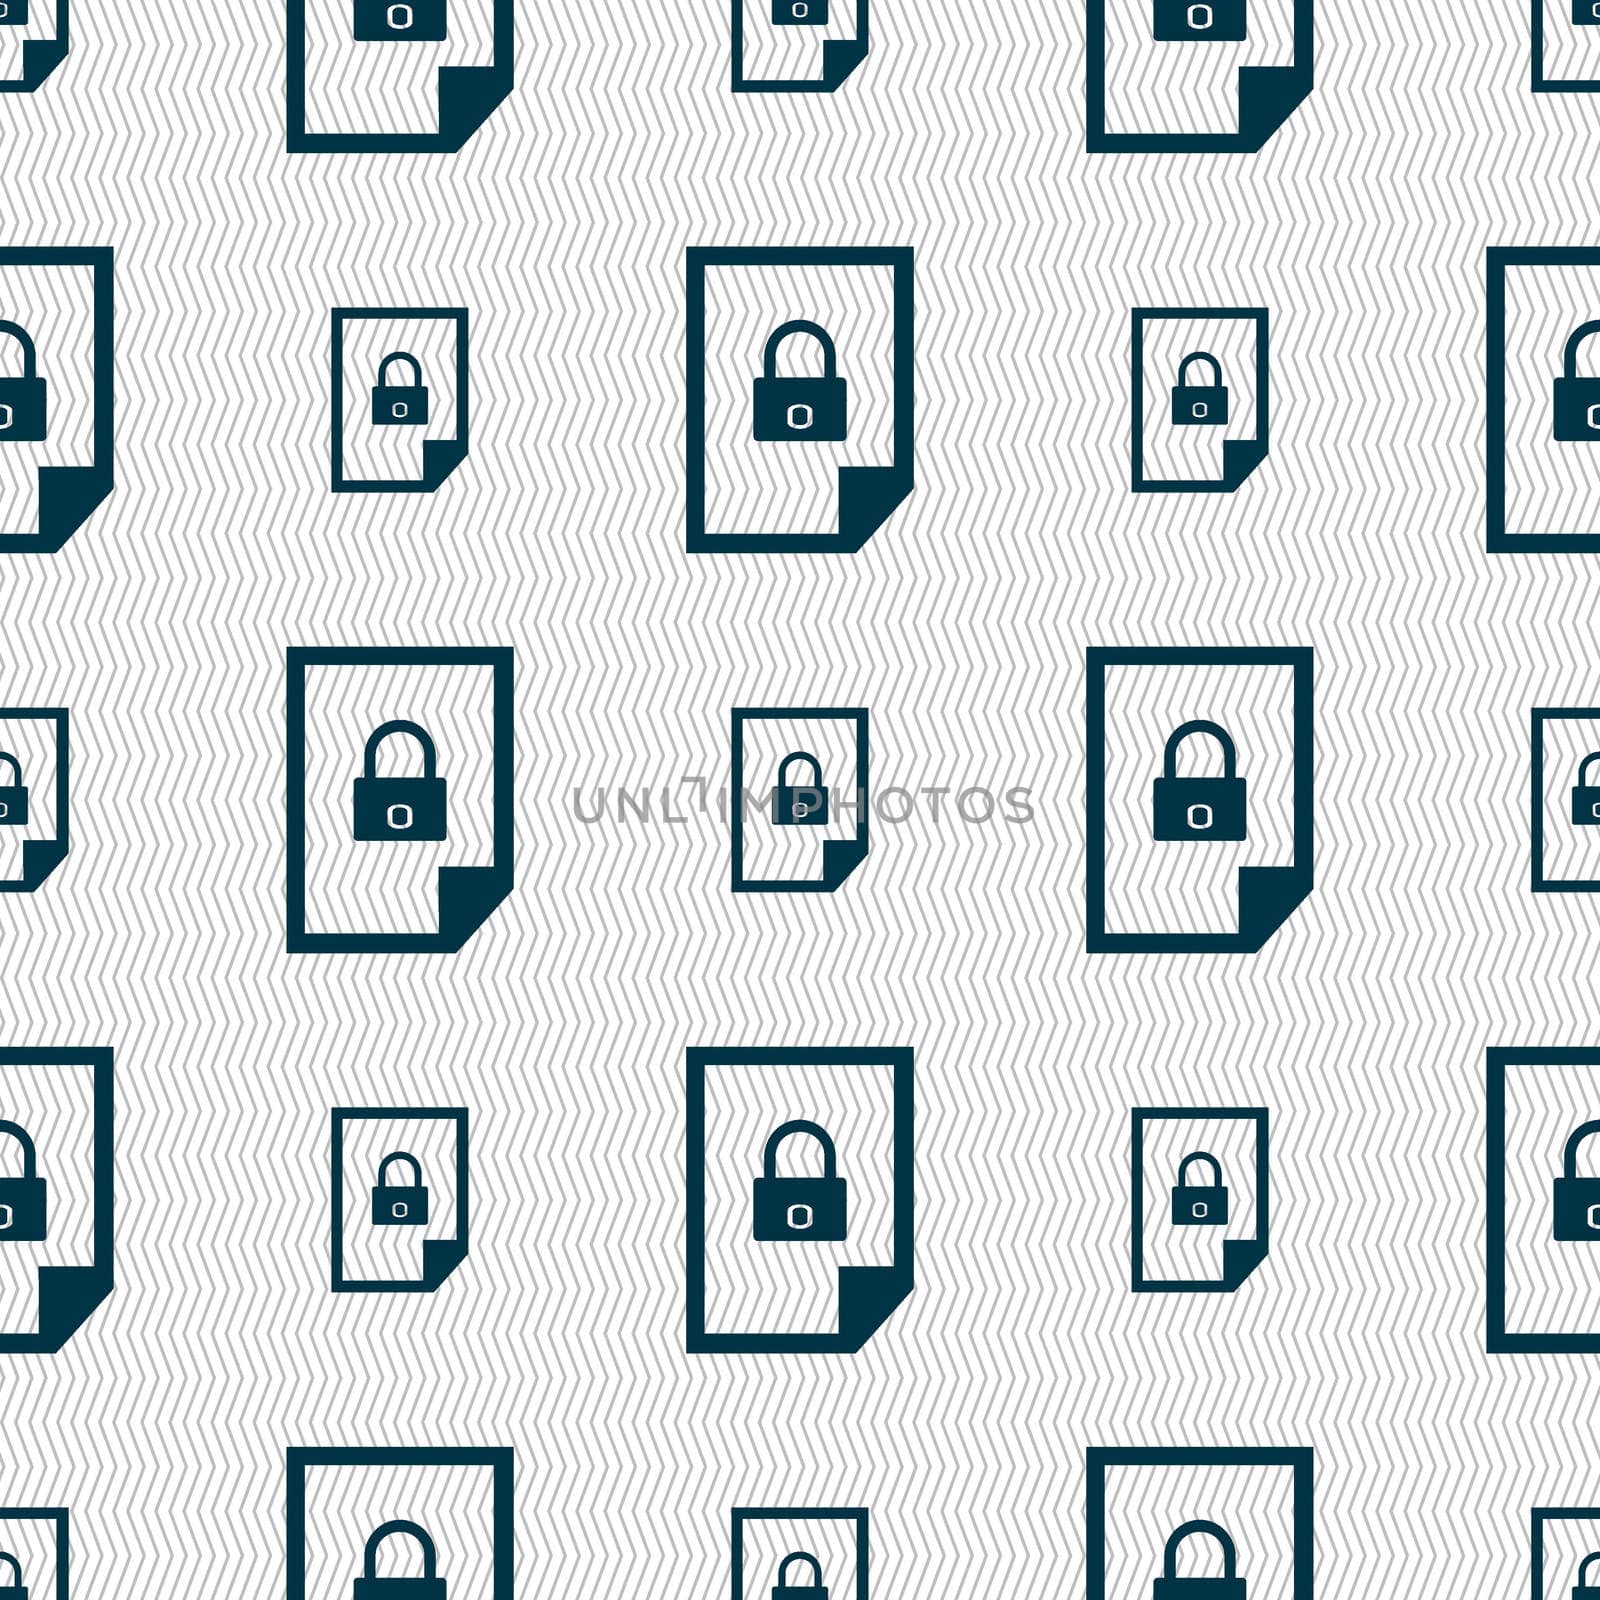 File locked icon sign. Seamless abstract background with geometric shapes. illustration